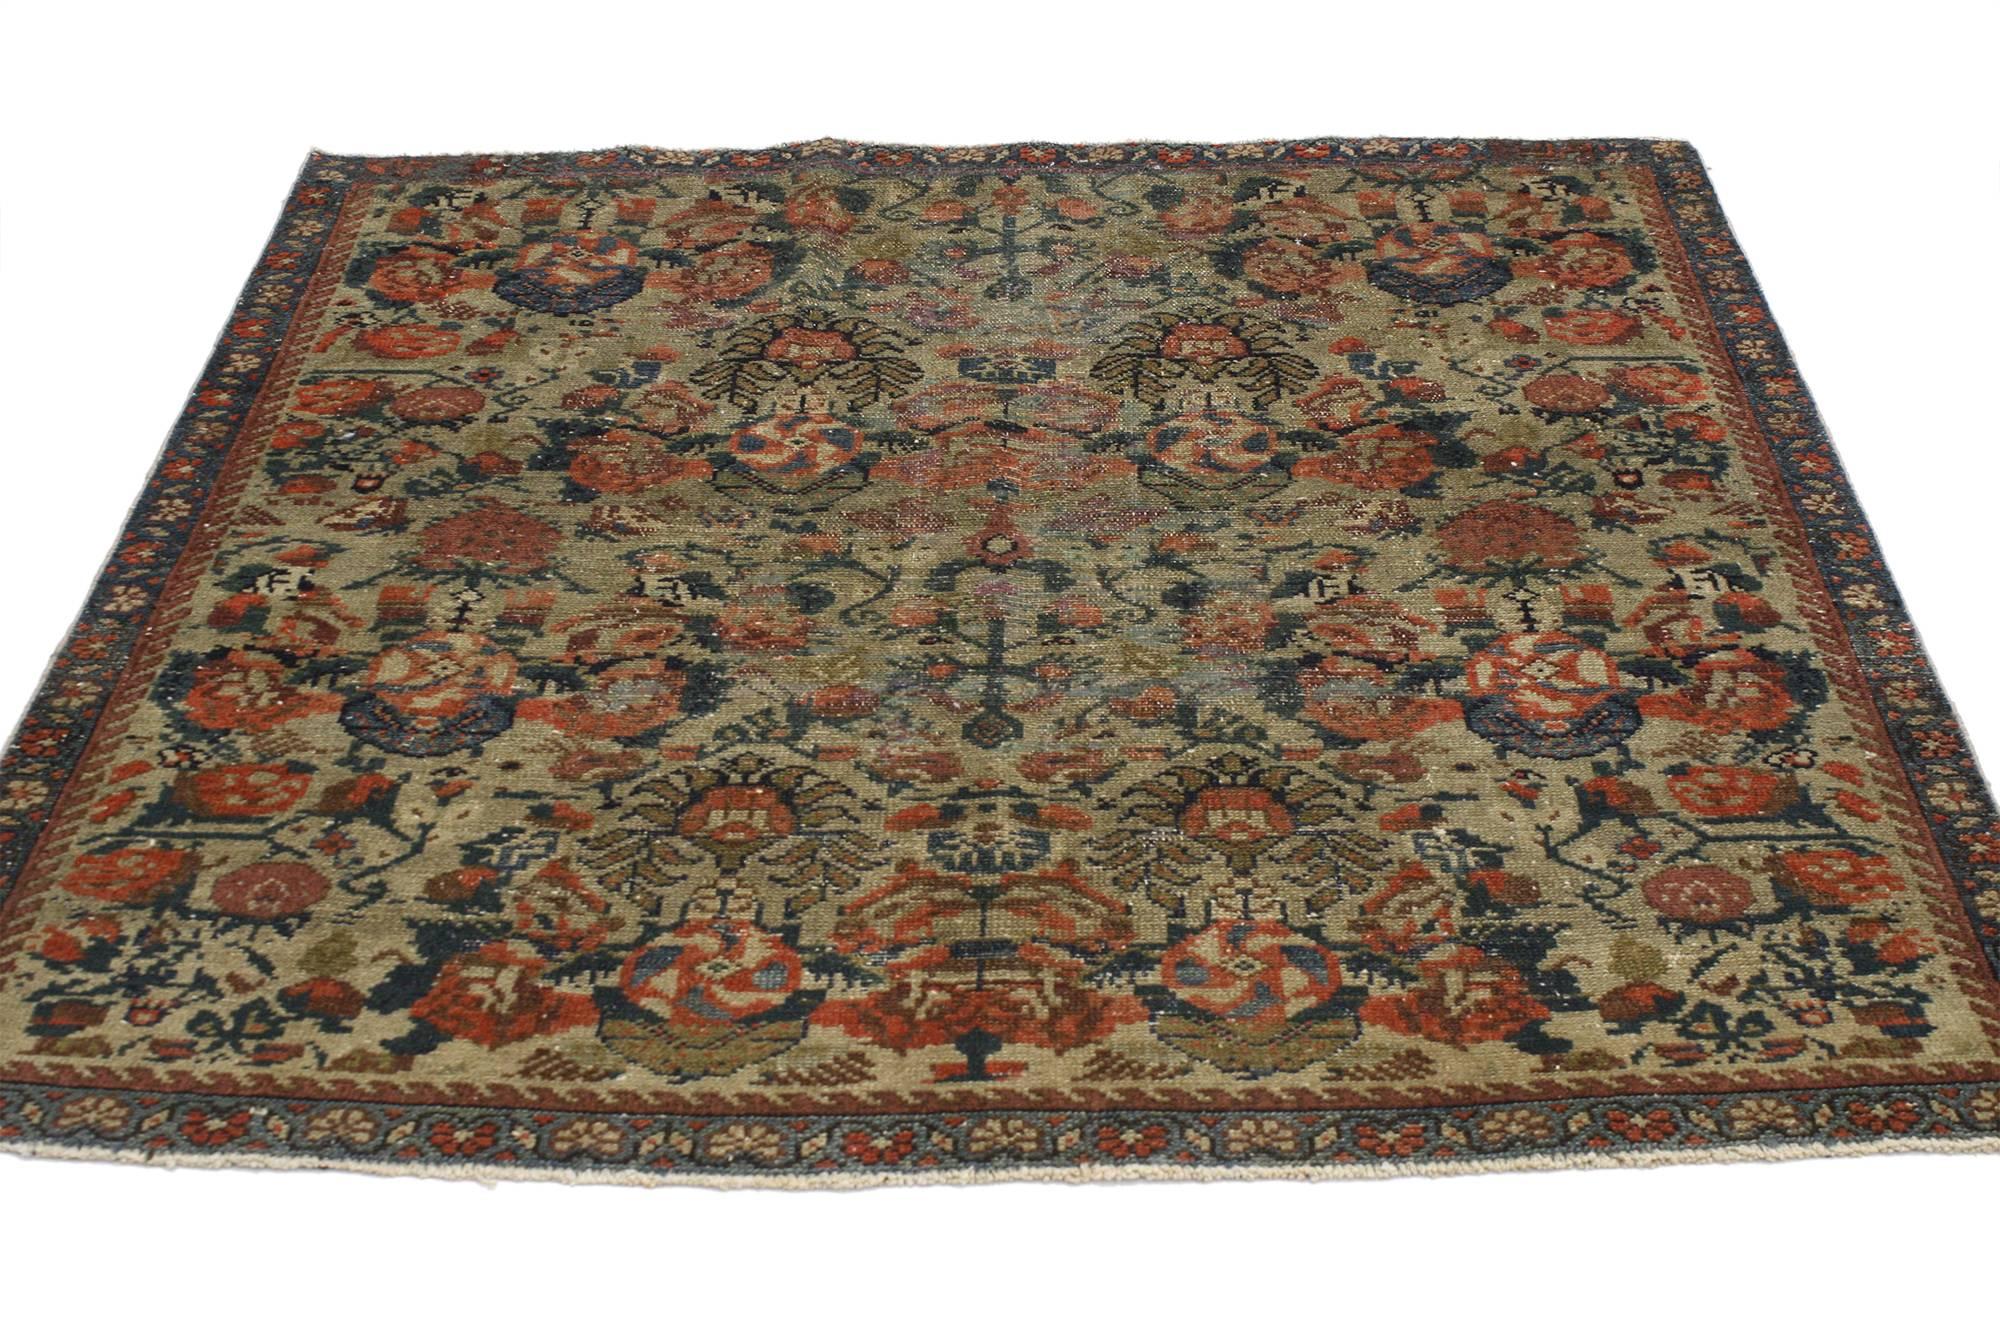 This distressed vintage Turkish Oushak rug features a modern rustic style. Immersed in Anatolian history and refined colors, this distressed vintage Oushak rug combines simplicity with sophistication. Impeccably made from hand-knotted wool and a